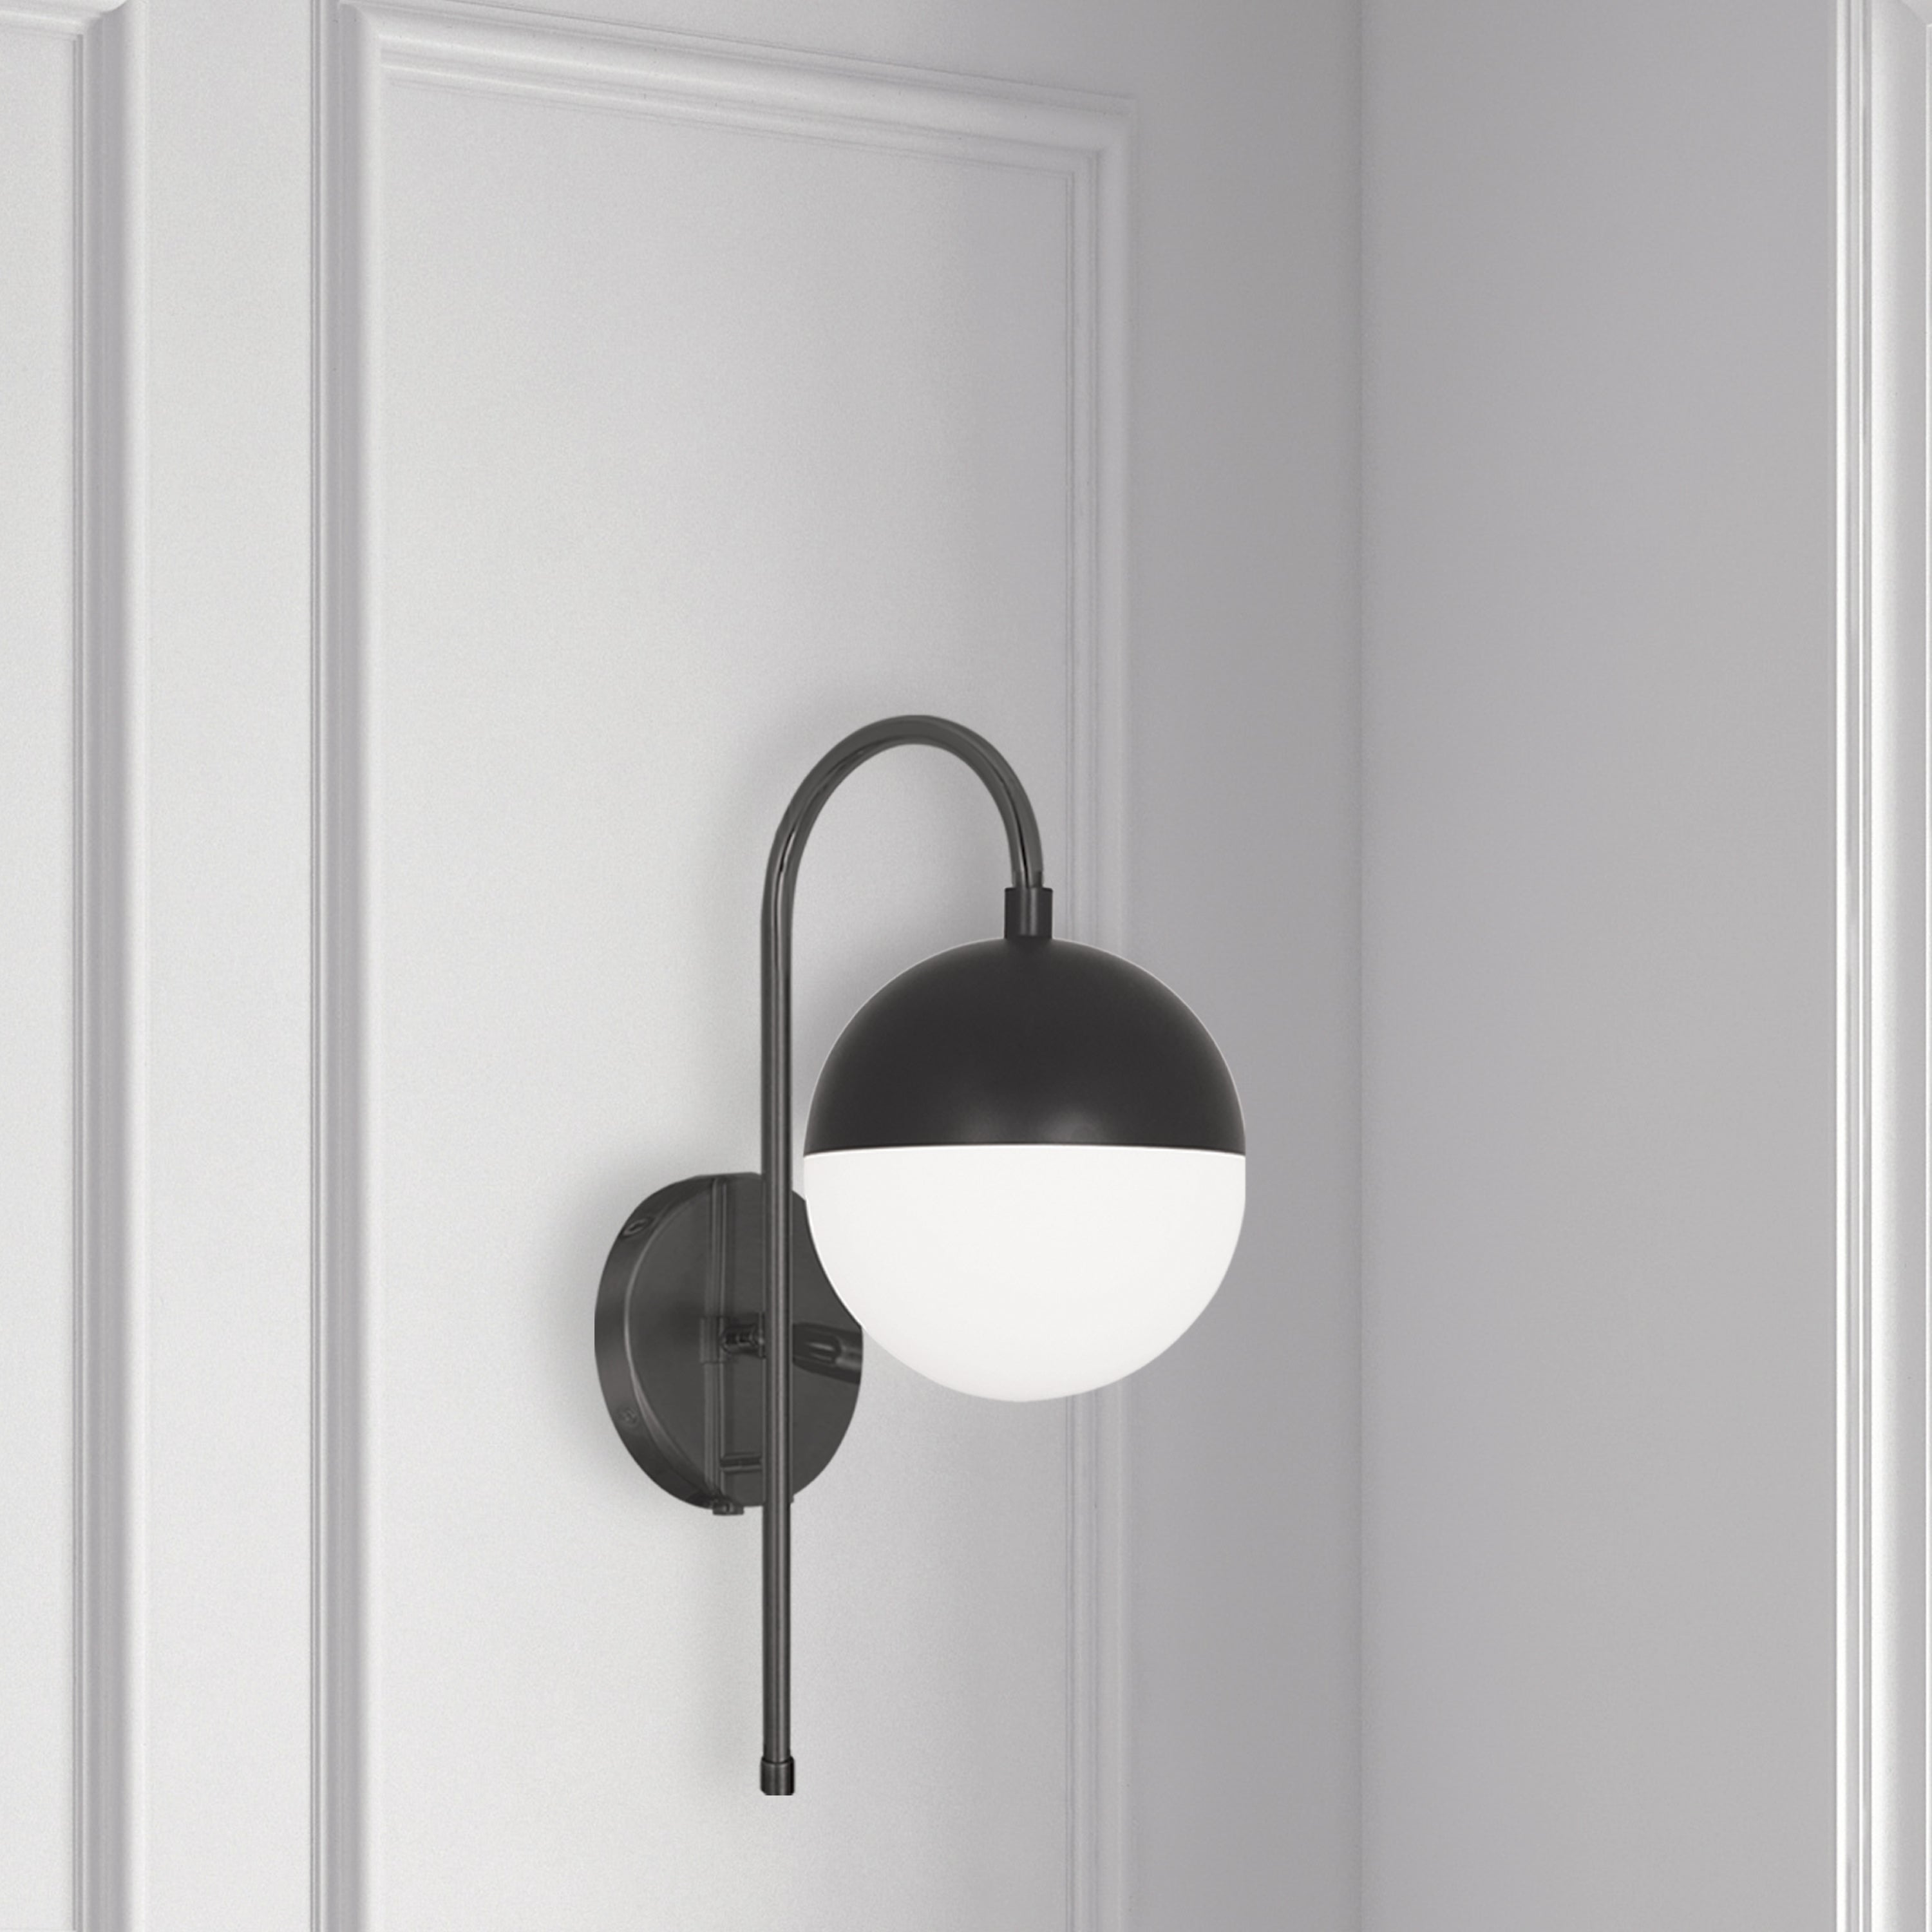 Dainolite Dayana - DAY-71W-MB - 1 Light Wall Sconce, Matte Black with White Glass, Hardwire or Plug-In - Black